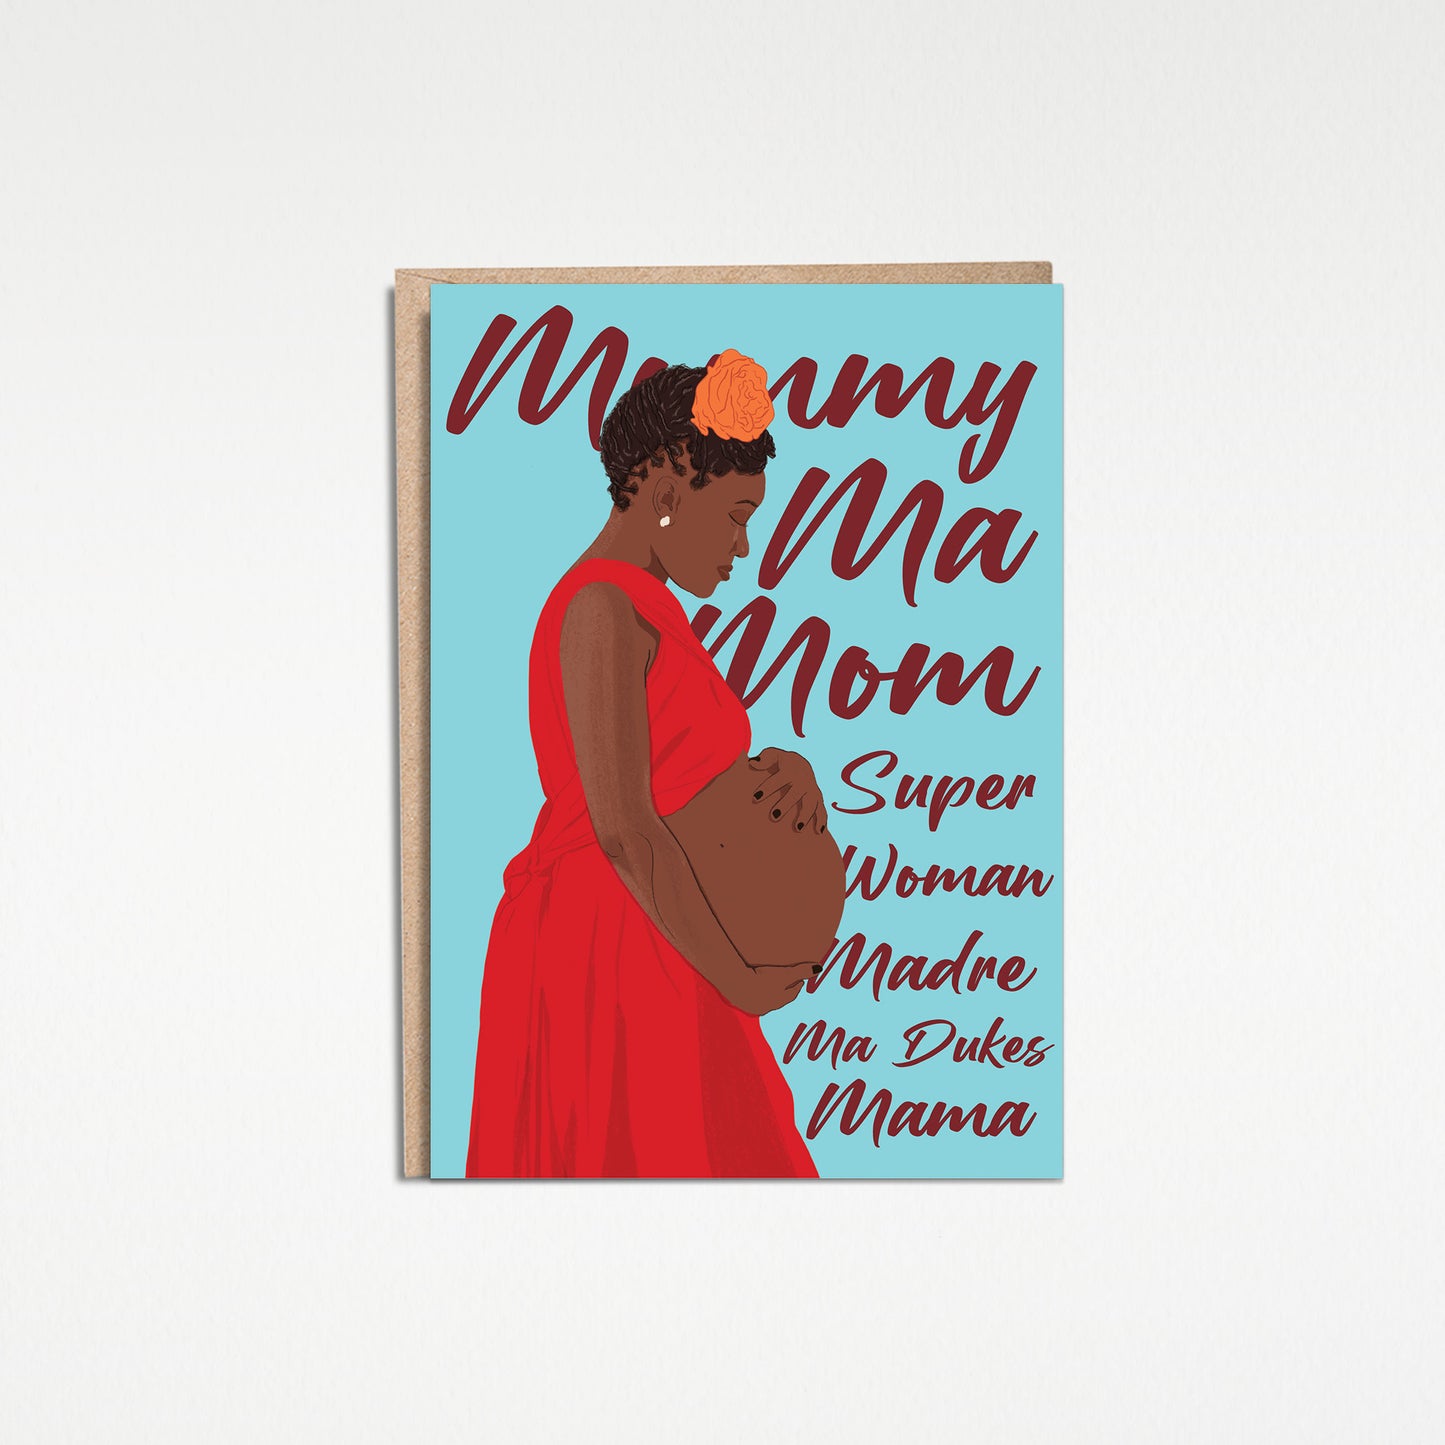 Congrats Mama 5x7” maternity new mom mothers day greeting cards from Goods Made By Digitrillnana, Ashley Fletcher. Black Woman Owned. Perfect card for a baby shower, expecting mom, and mother's day!